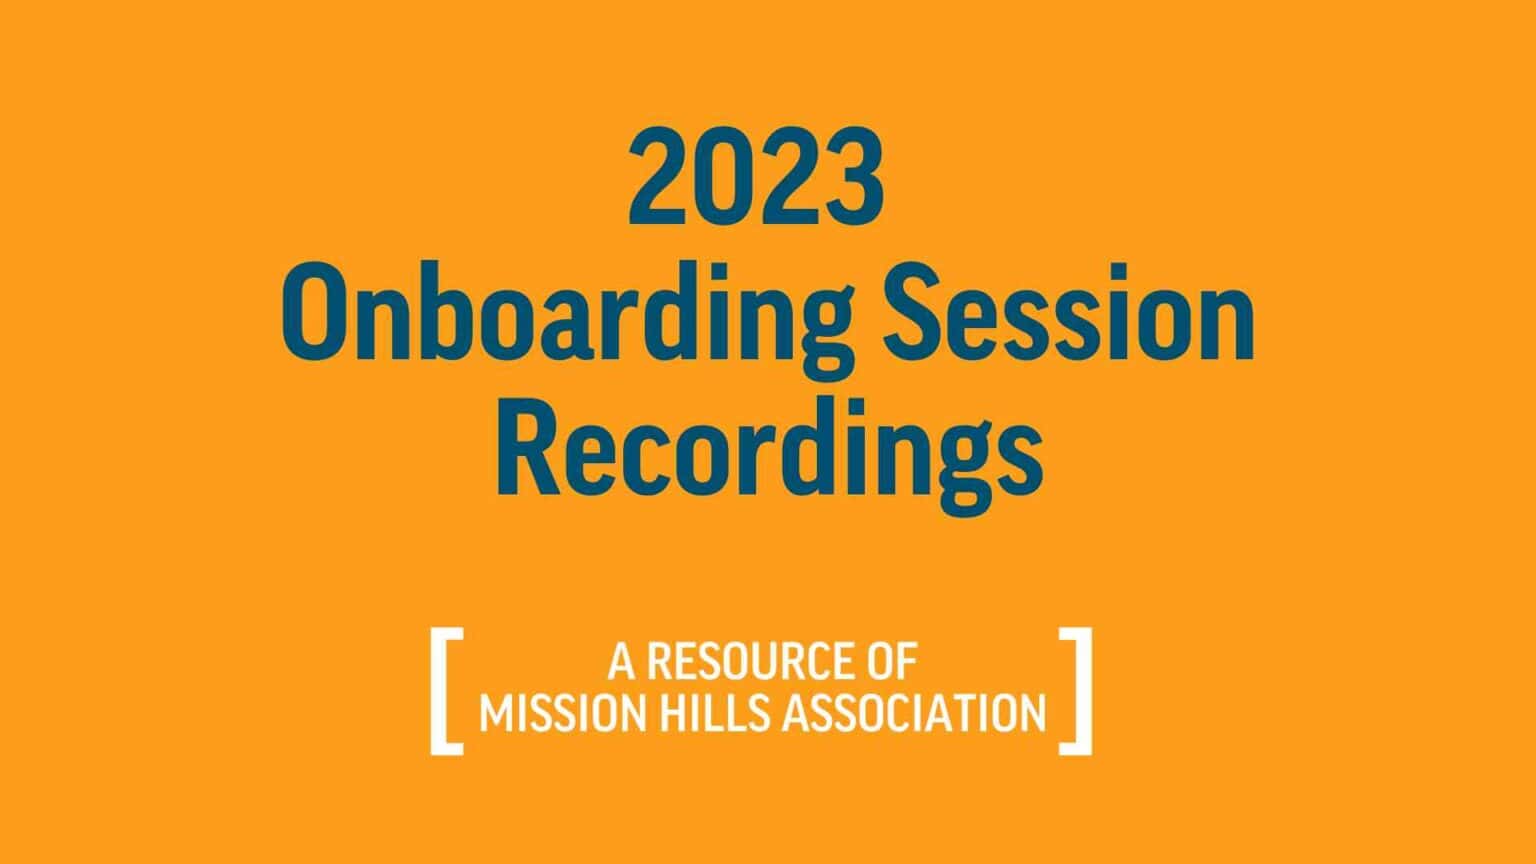 2023 Onboarding Session Recordings